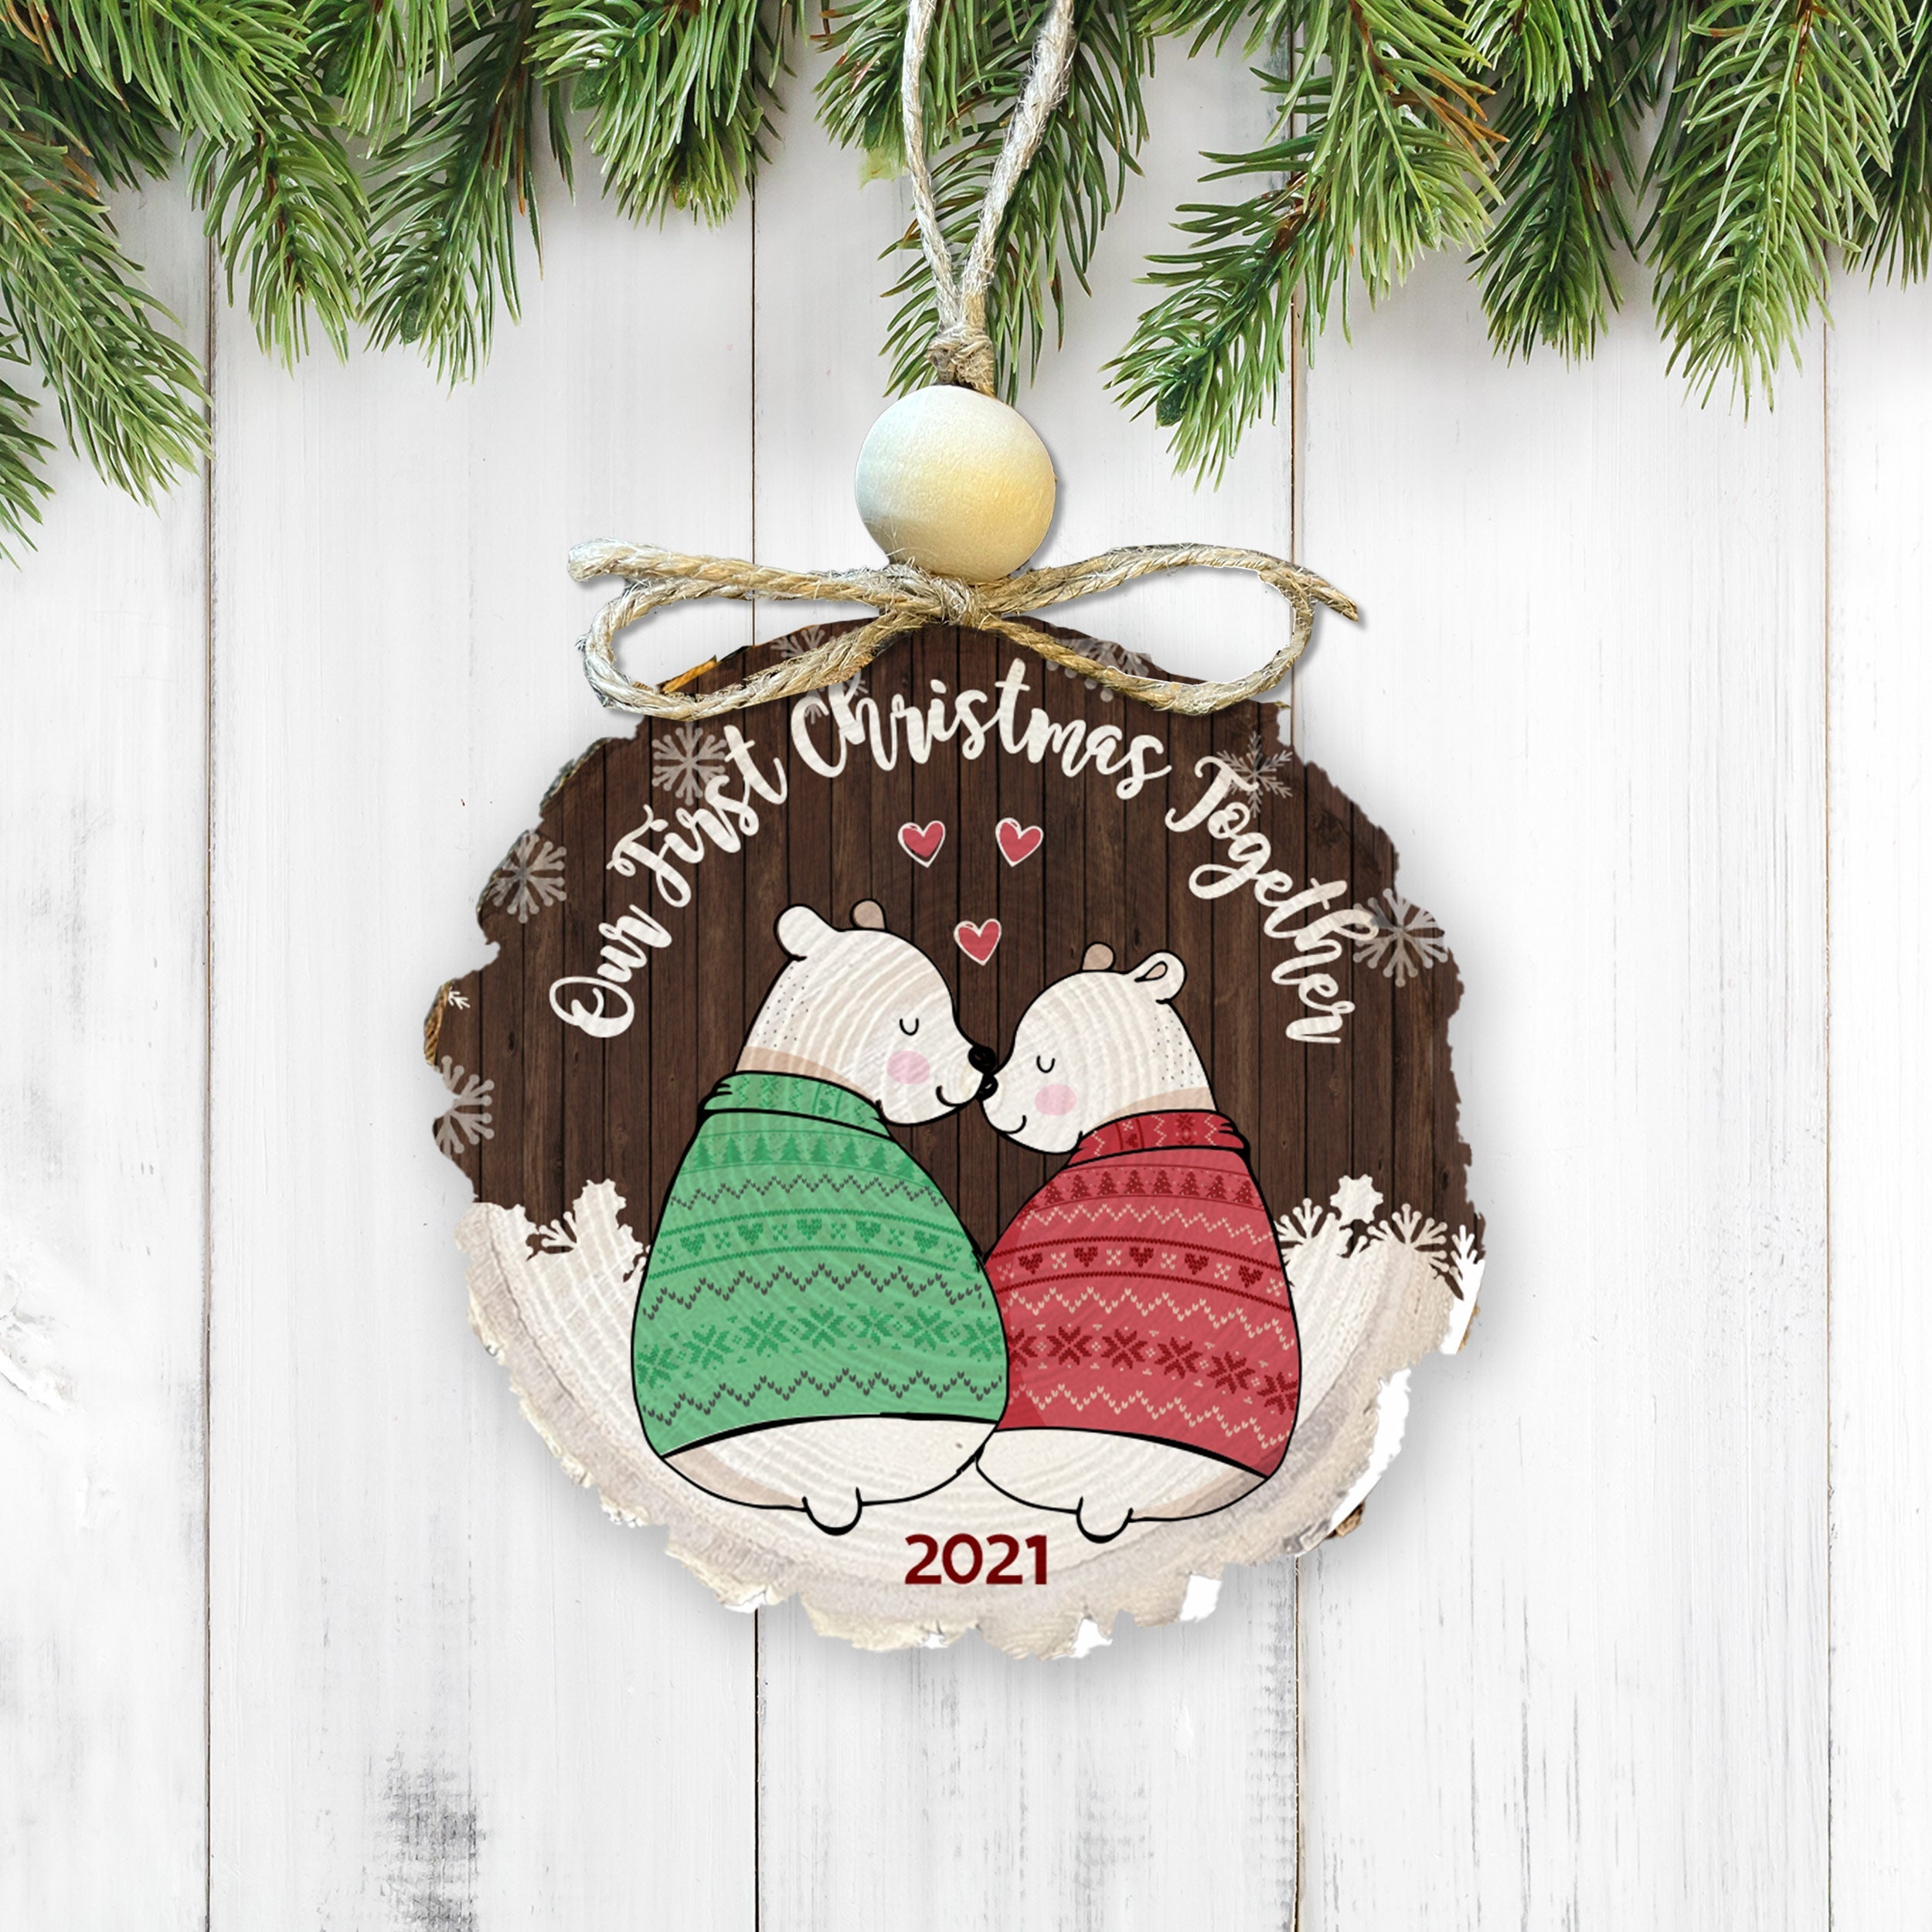 Brown Bear Wood Slice Ornament Set - Rustic Holiday Decoration!